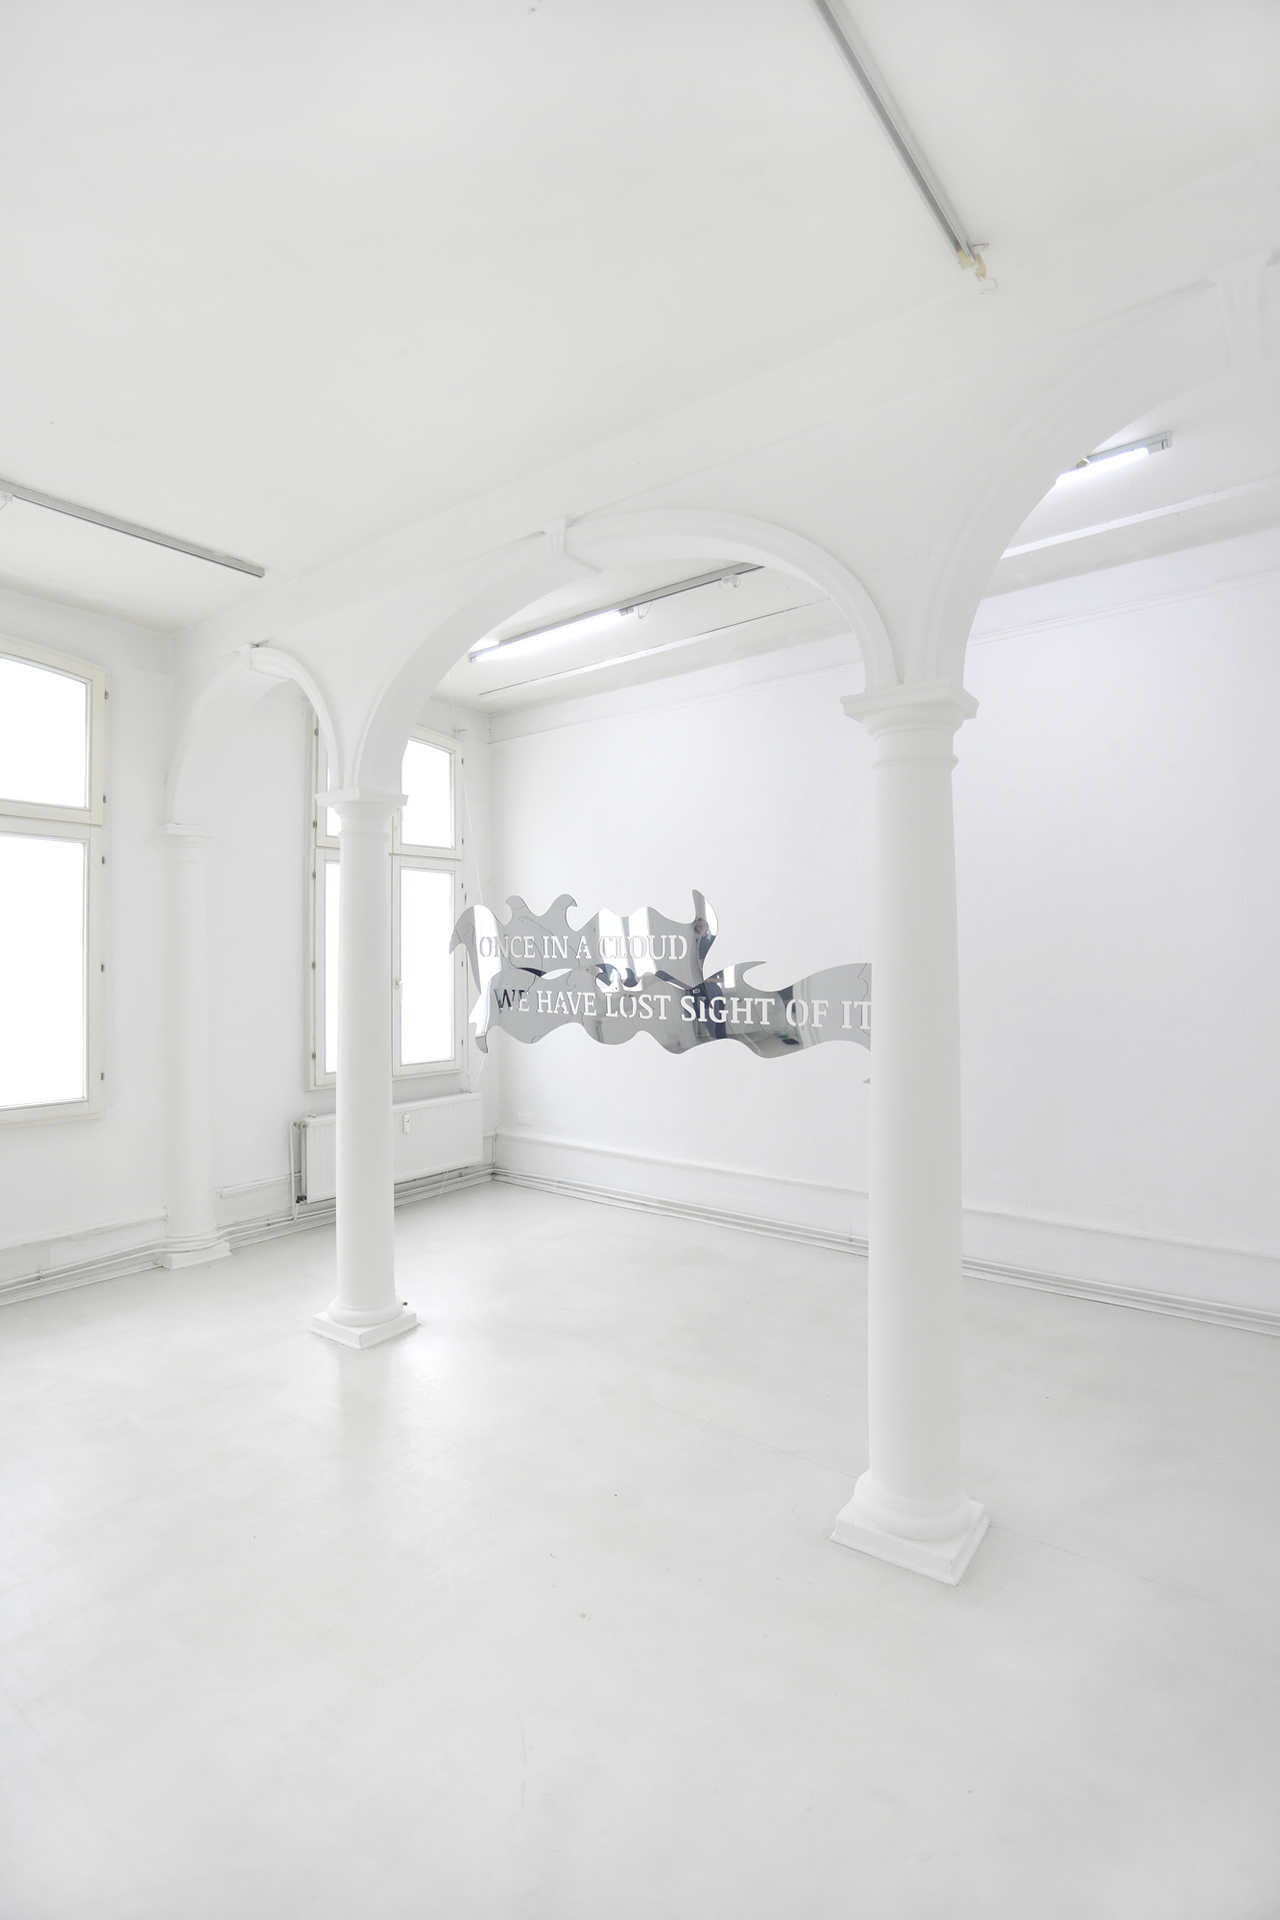 Lena Marie Emrich, "Once in a cloud we have lost sight of it", 2020, Plexiglass, Two-way mirror, 220 x 65 x 12 cm